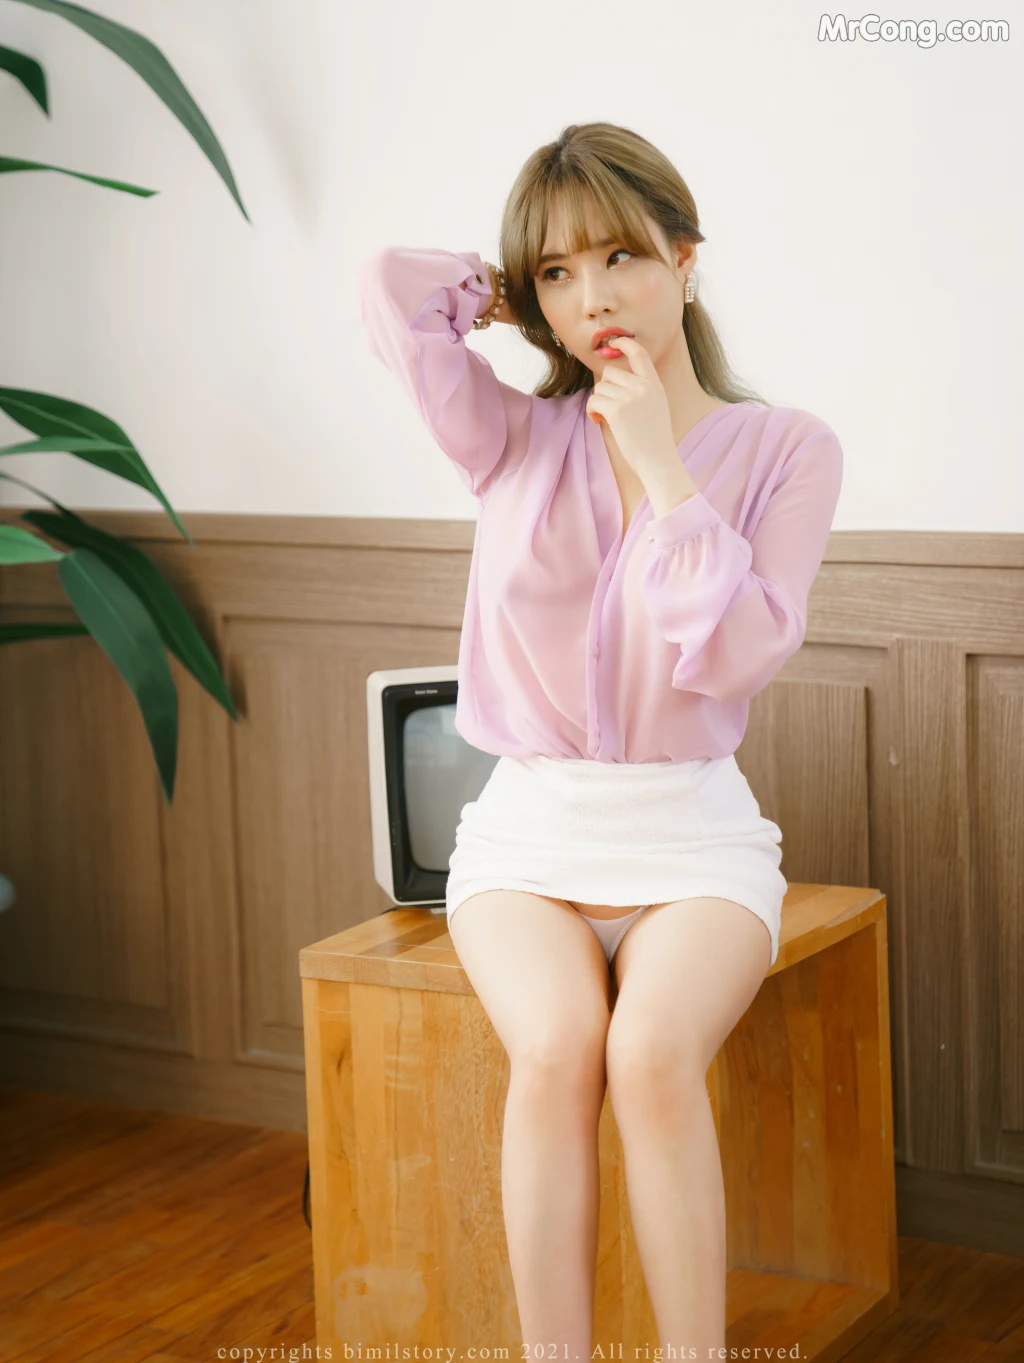 [Bimilstory] Eunha (은하): Vol.04 - How to Dress in Case of F Cup Size Woman (42 photos)